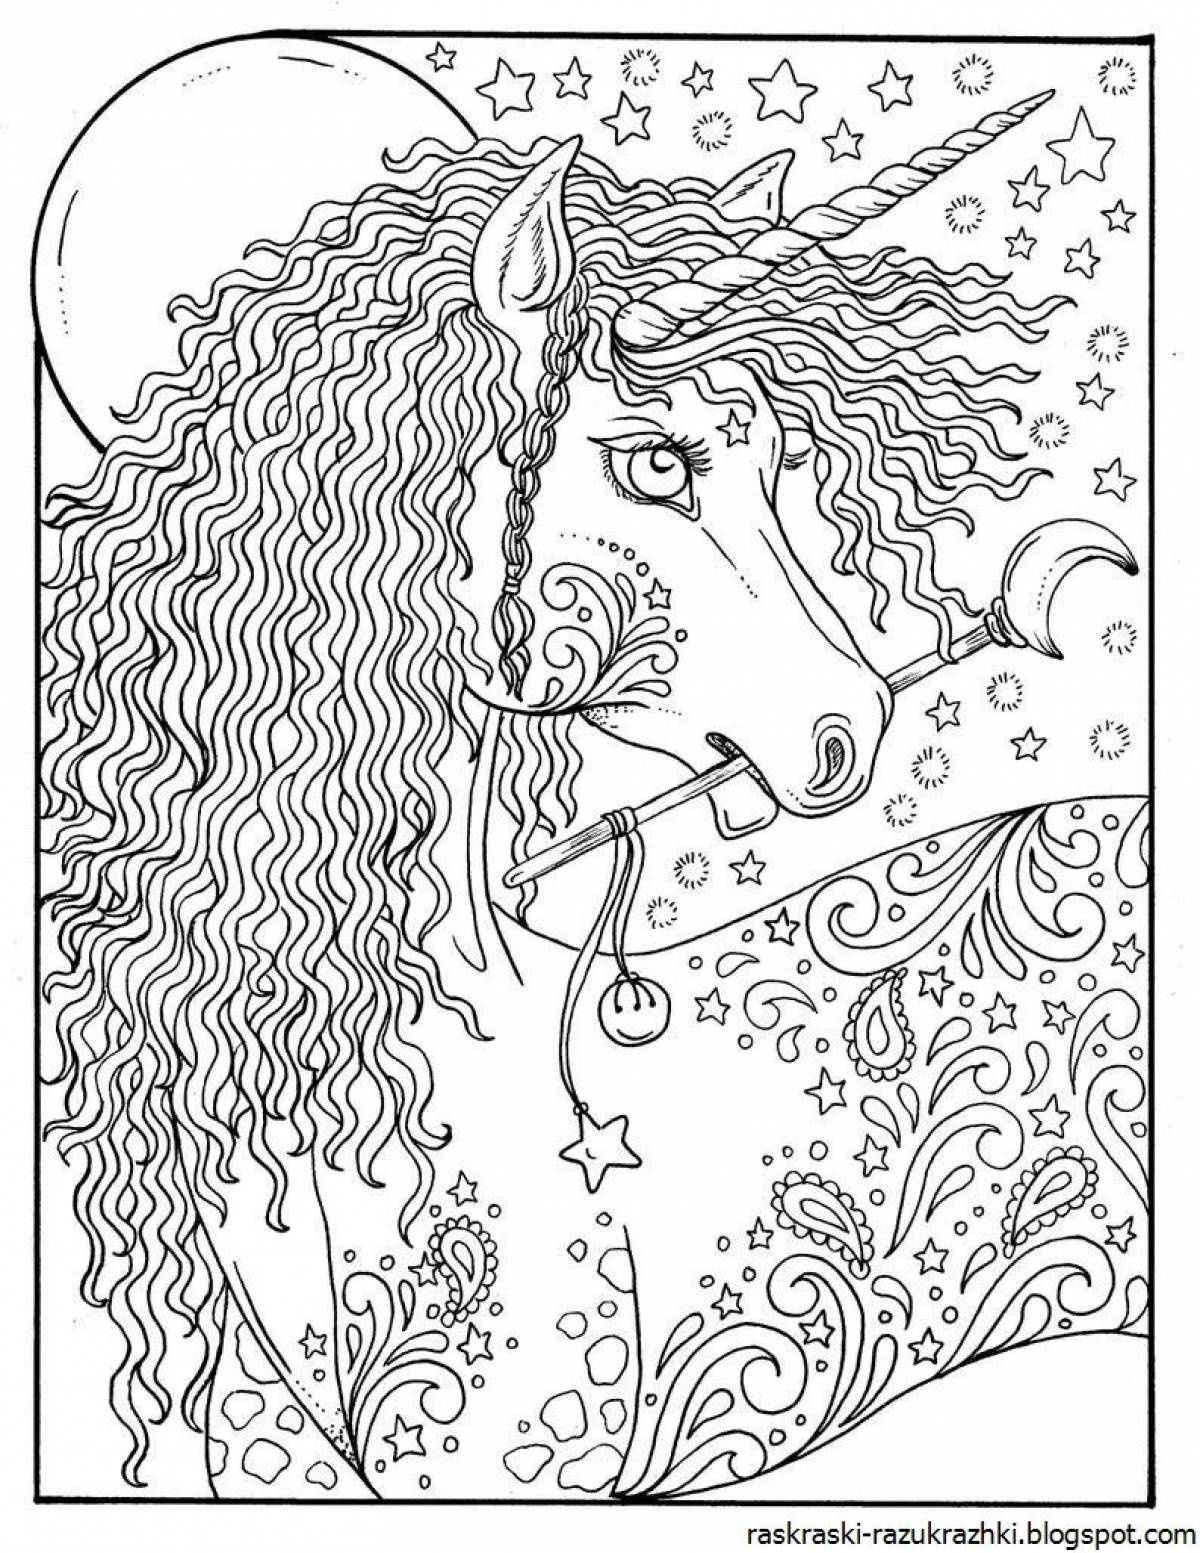 Cute unicorn antistress coloring book for kids